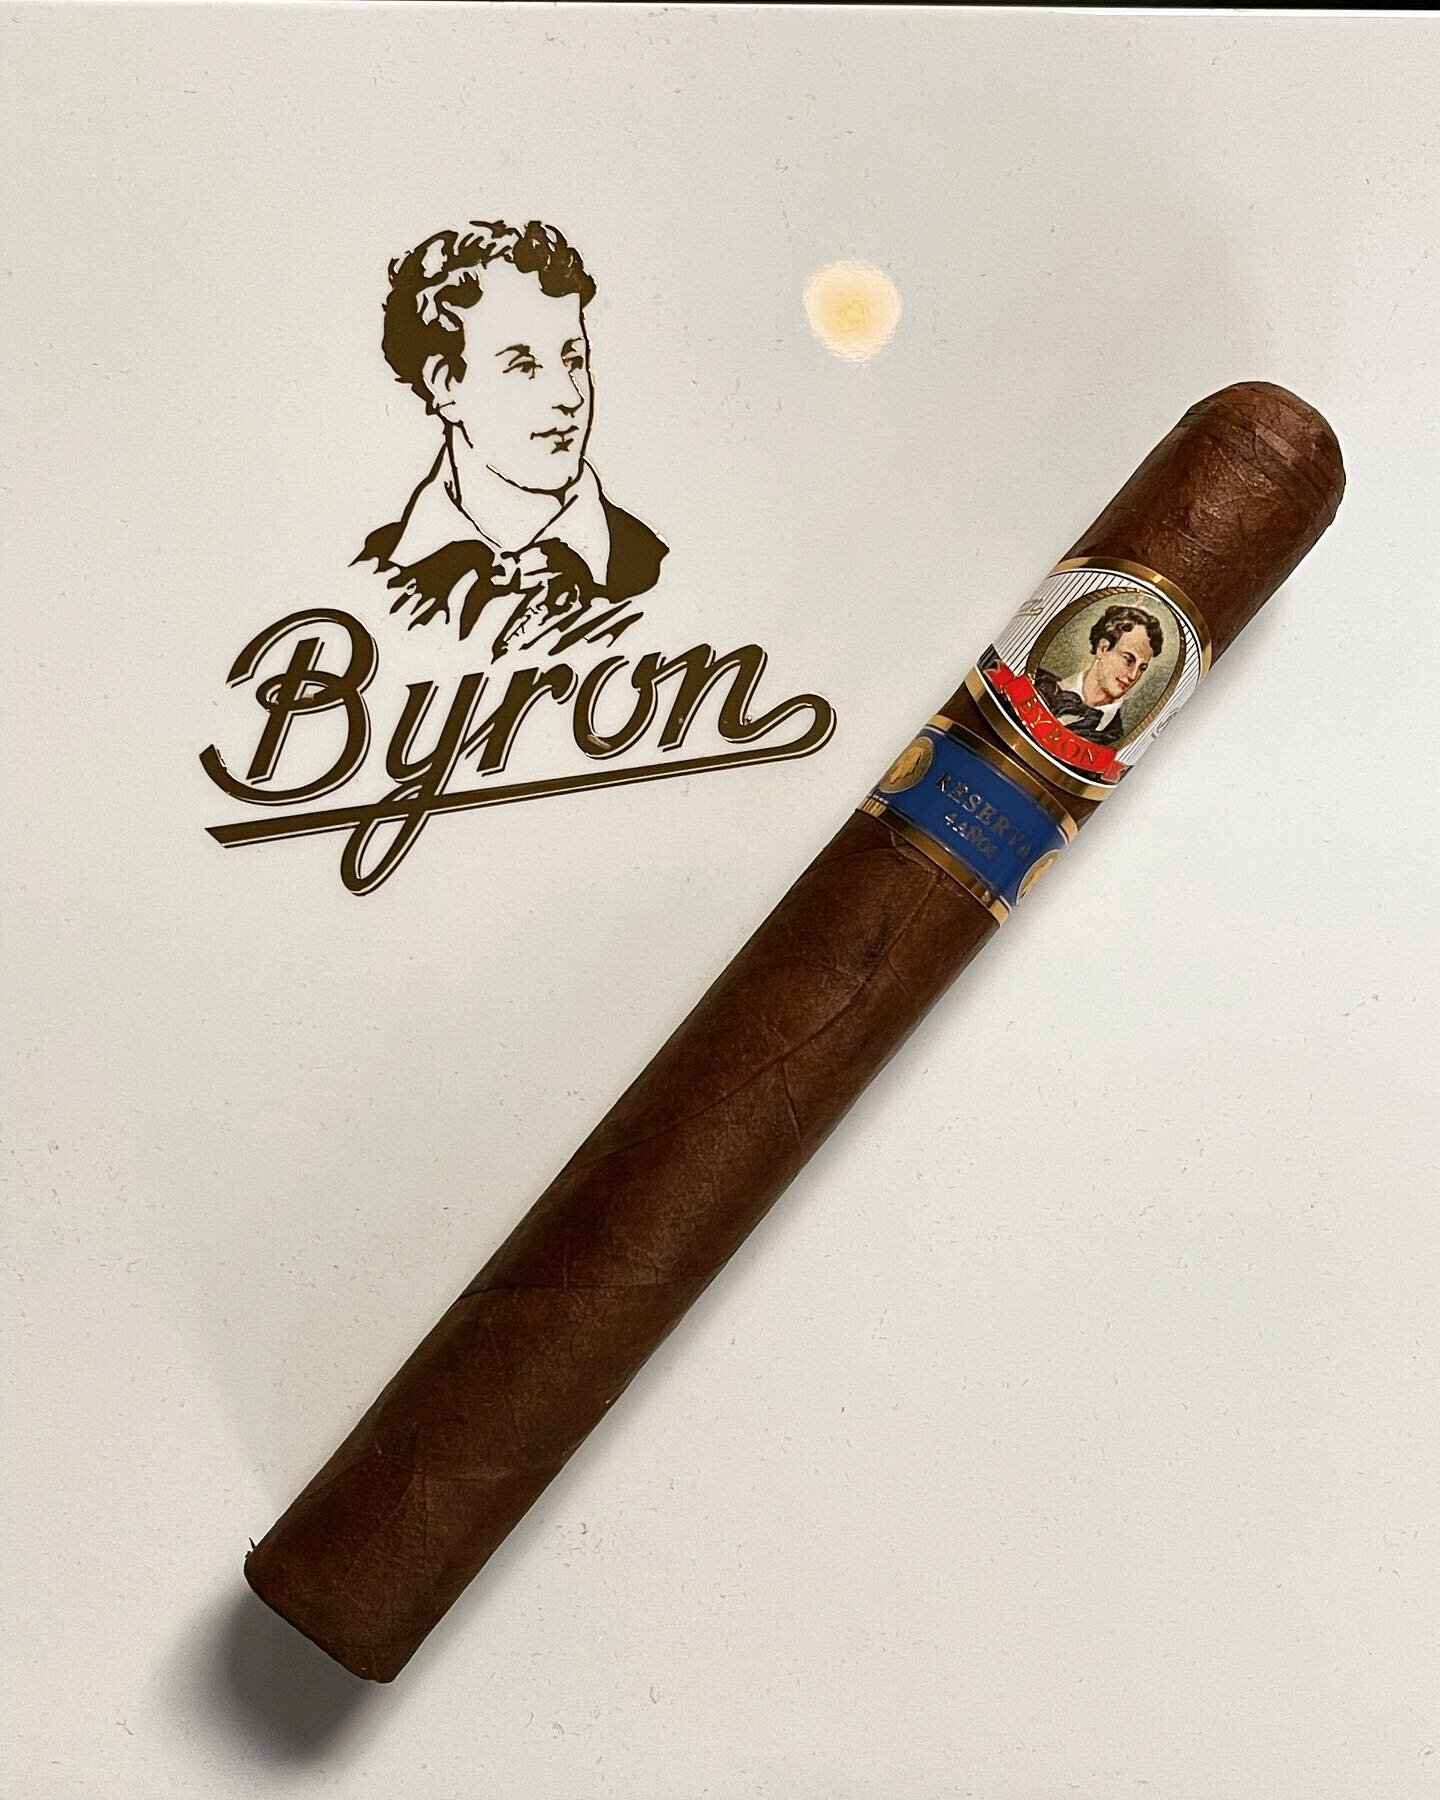 &ldquo;In 1848 Jose and Eusebio Alfonso, cousins, opened a small cigar factory in Santiago de Las Vegas, a province of Havana, Cuba and created a cigar brand named Lord Byron in honor of this world renowned English poet. He was arguable the greatest 